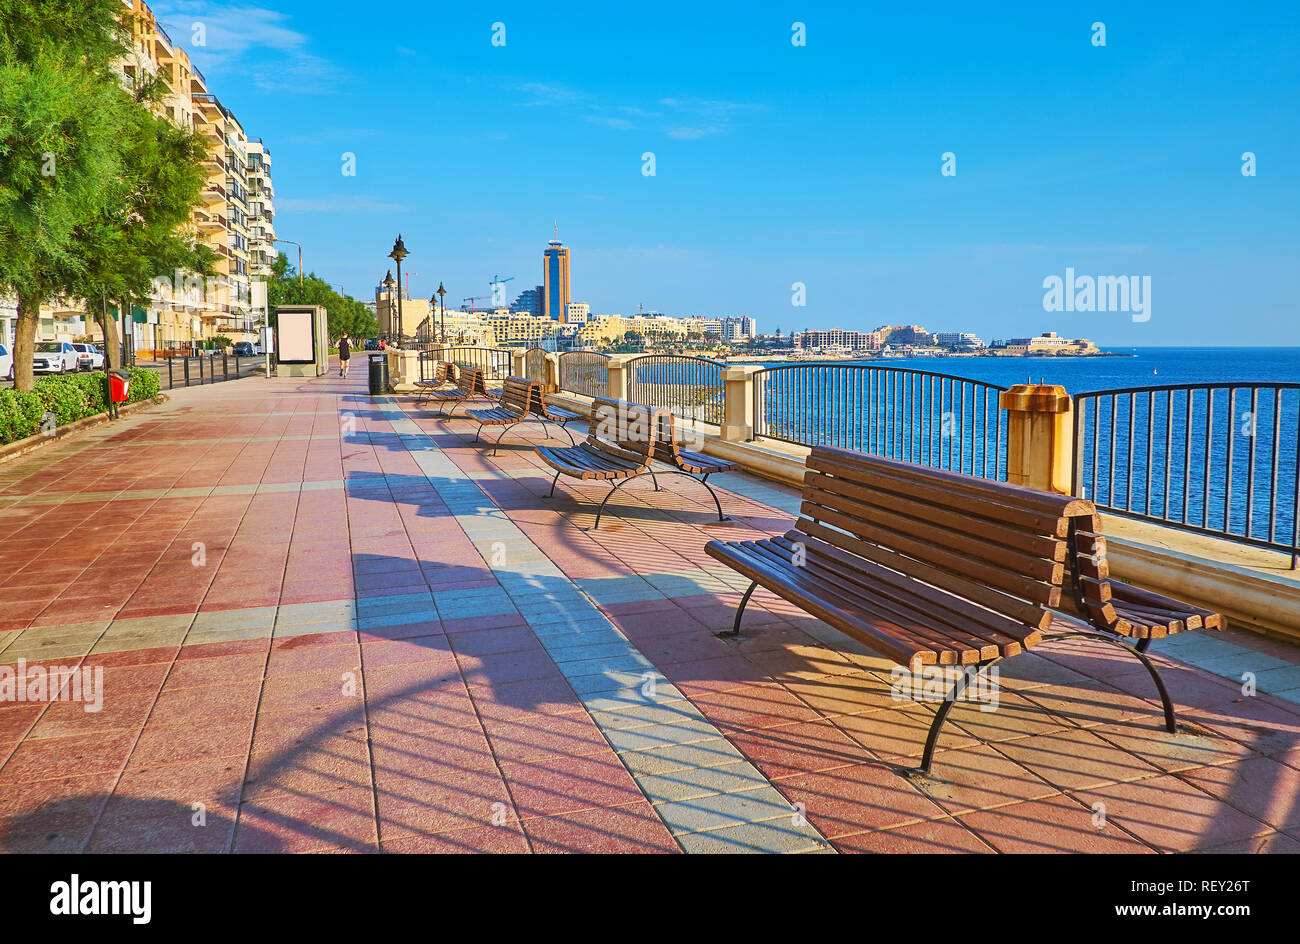 The modern seaside promenade of Sliema is the perfect place for morning jogging or lazy walks with nice views on the beach and St Julians coast, Malta Stock Photo